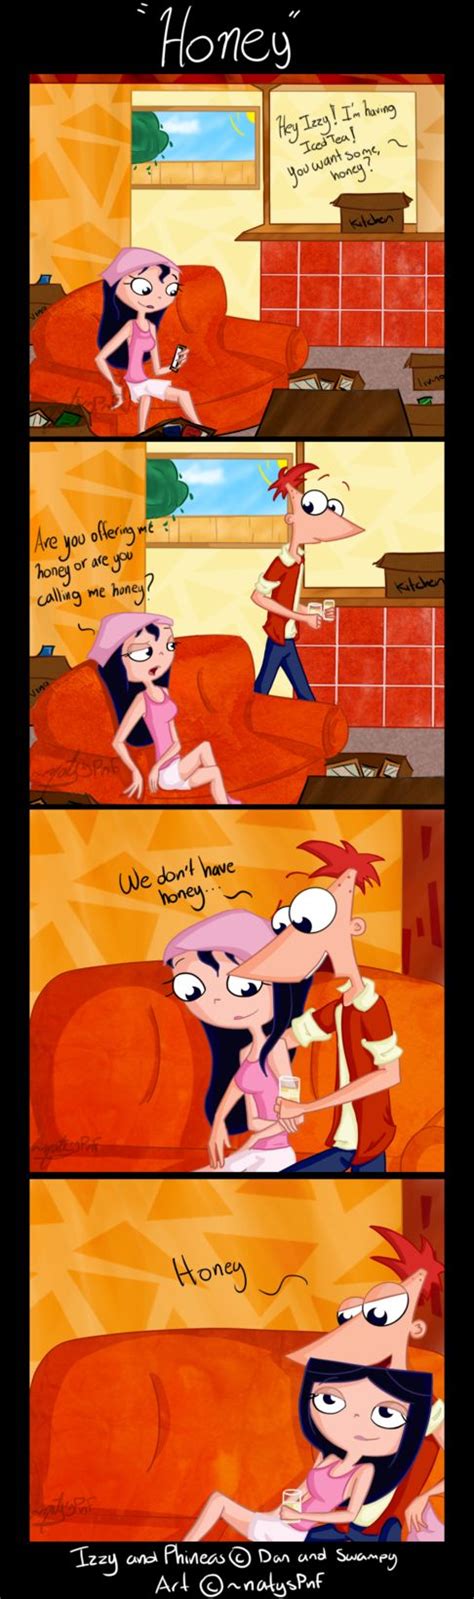 Porn pics from section Phineas and Ferb for free and without registration. The best collection of rule 34 porn pics for adults.